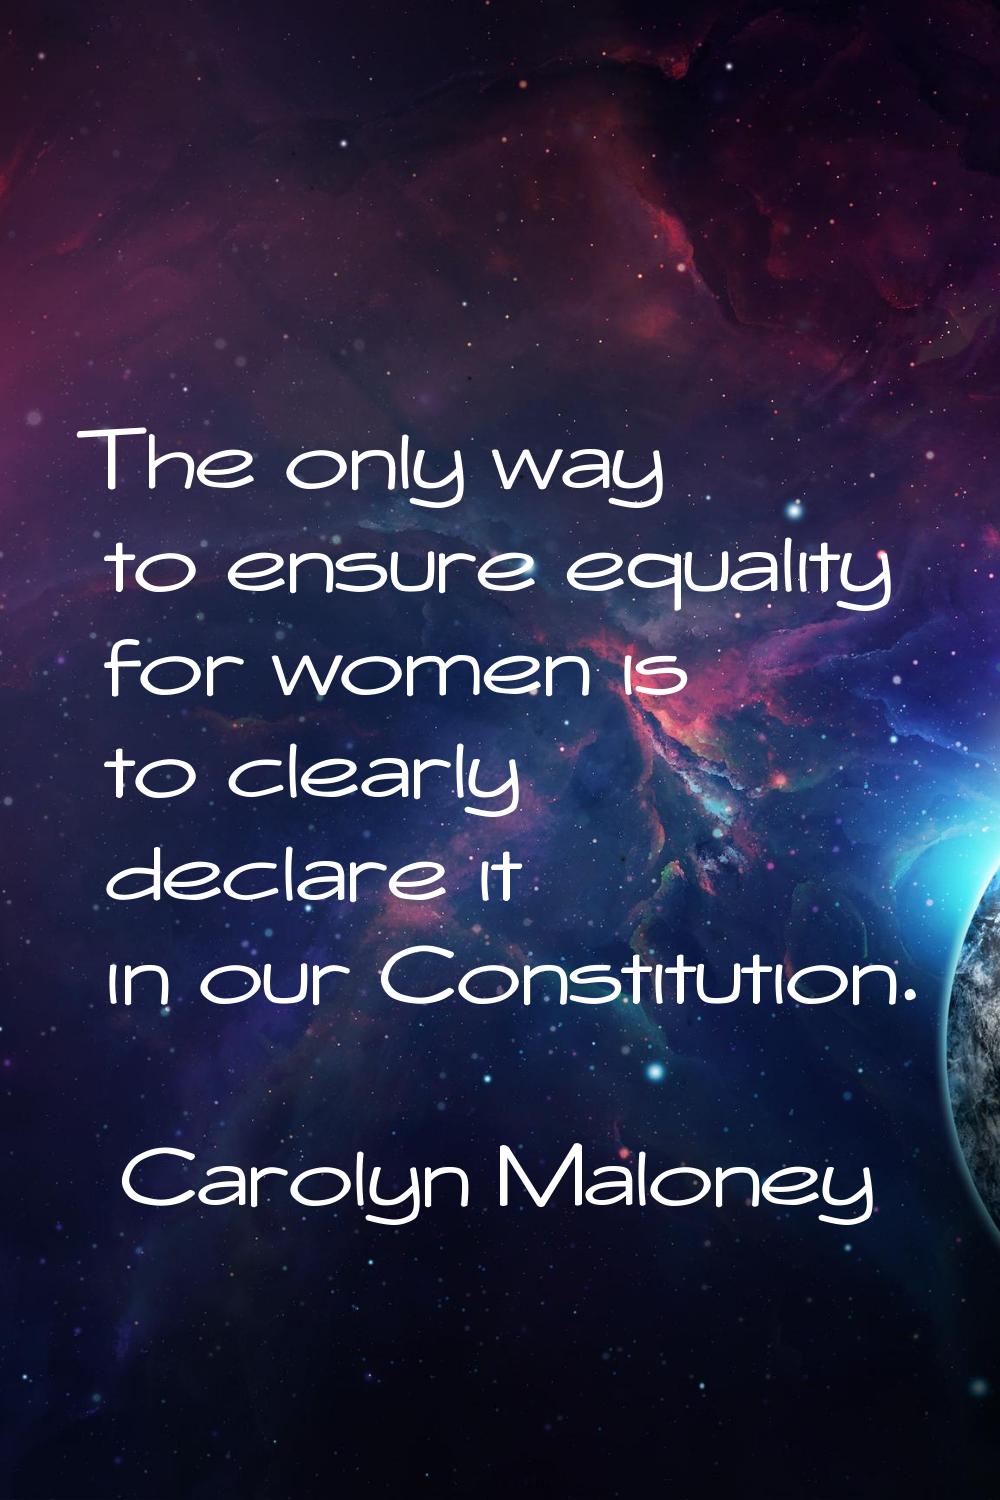 The only way to ensure equality for women is to clearly declare it in our Constitution.